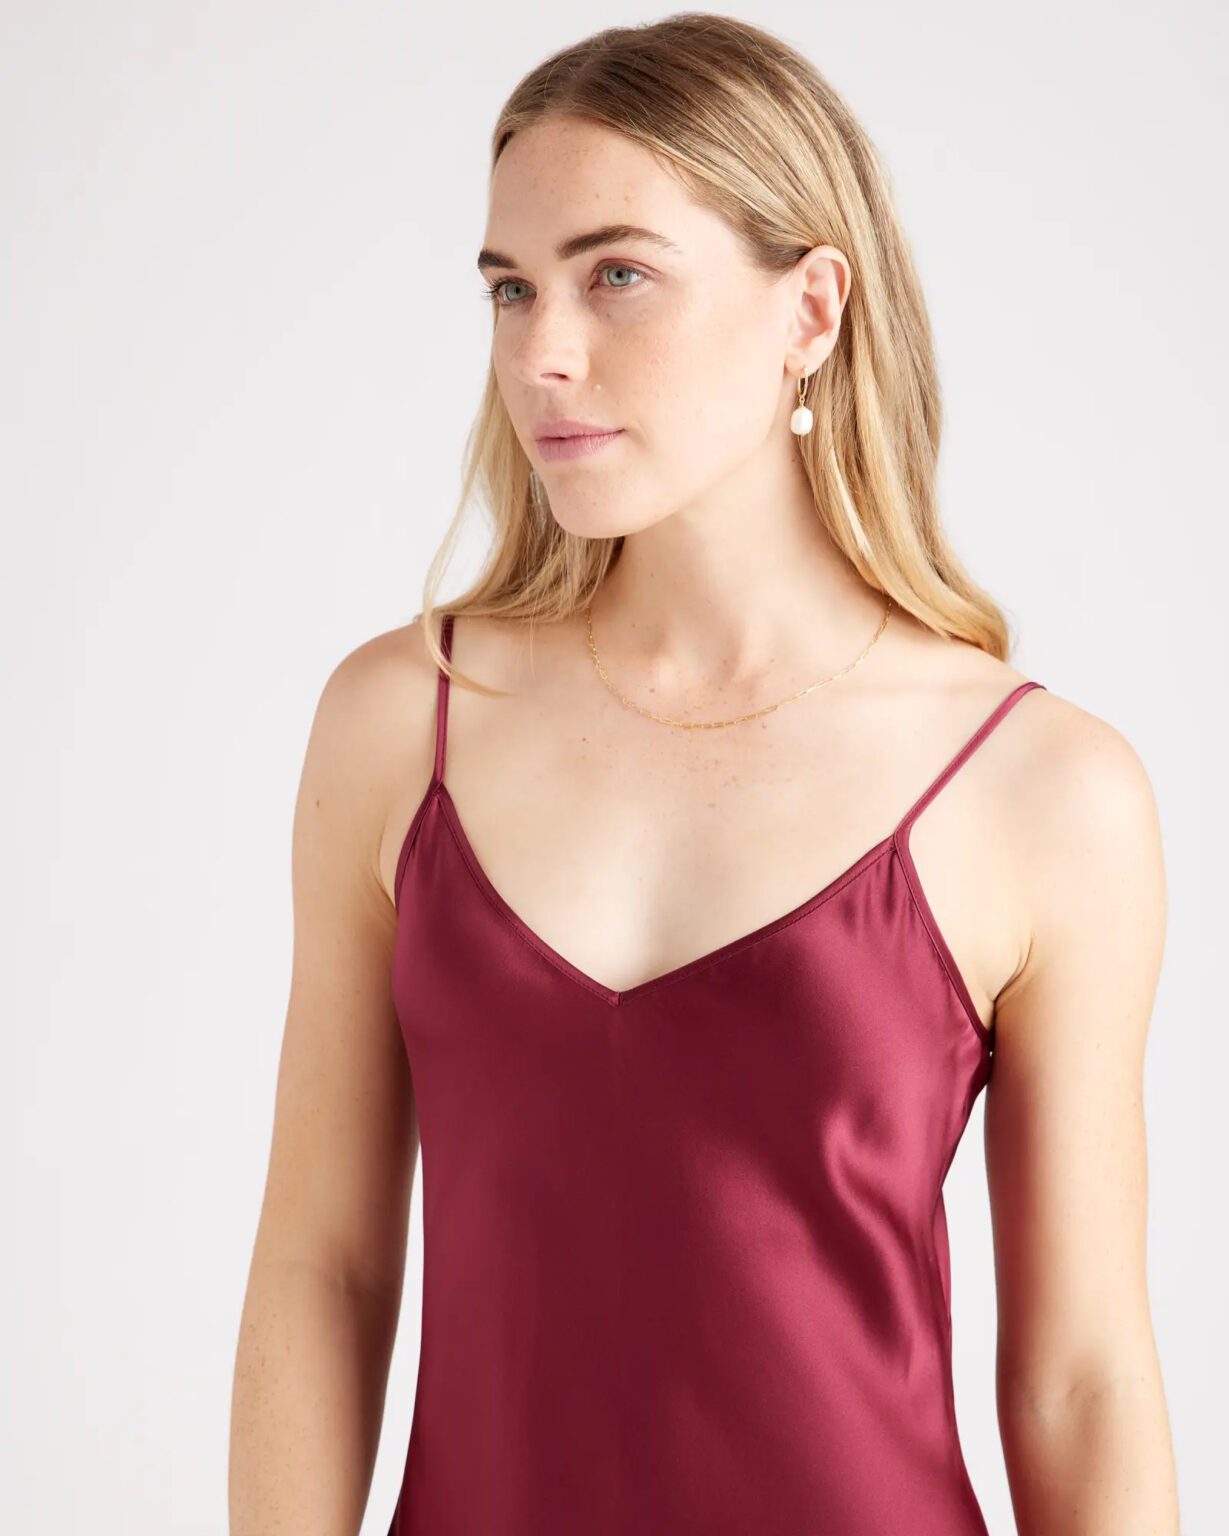 7 Slip Dresses For Summer Made From Natural Materials - The Good Trade